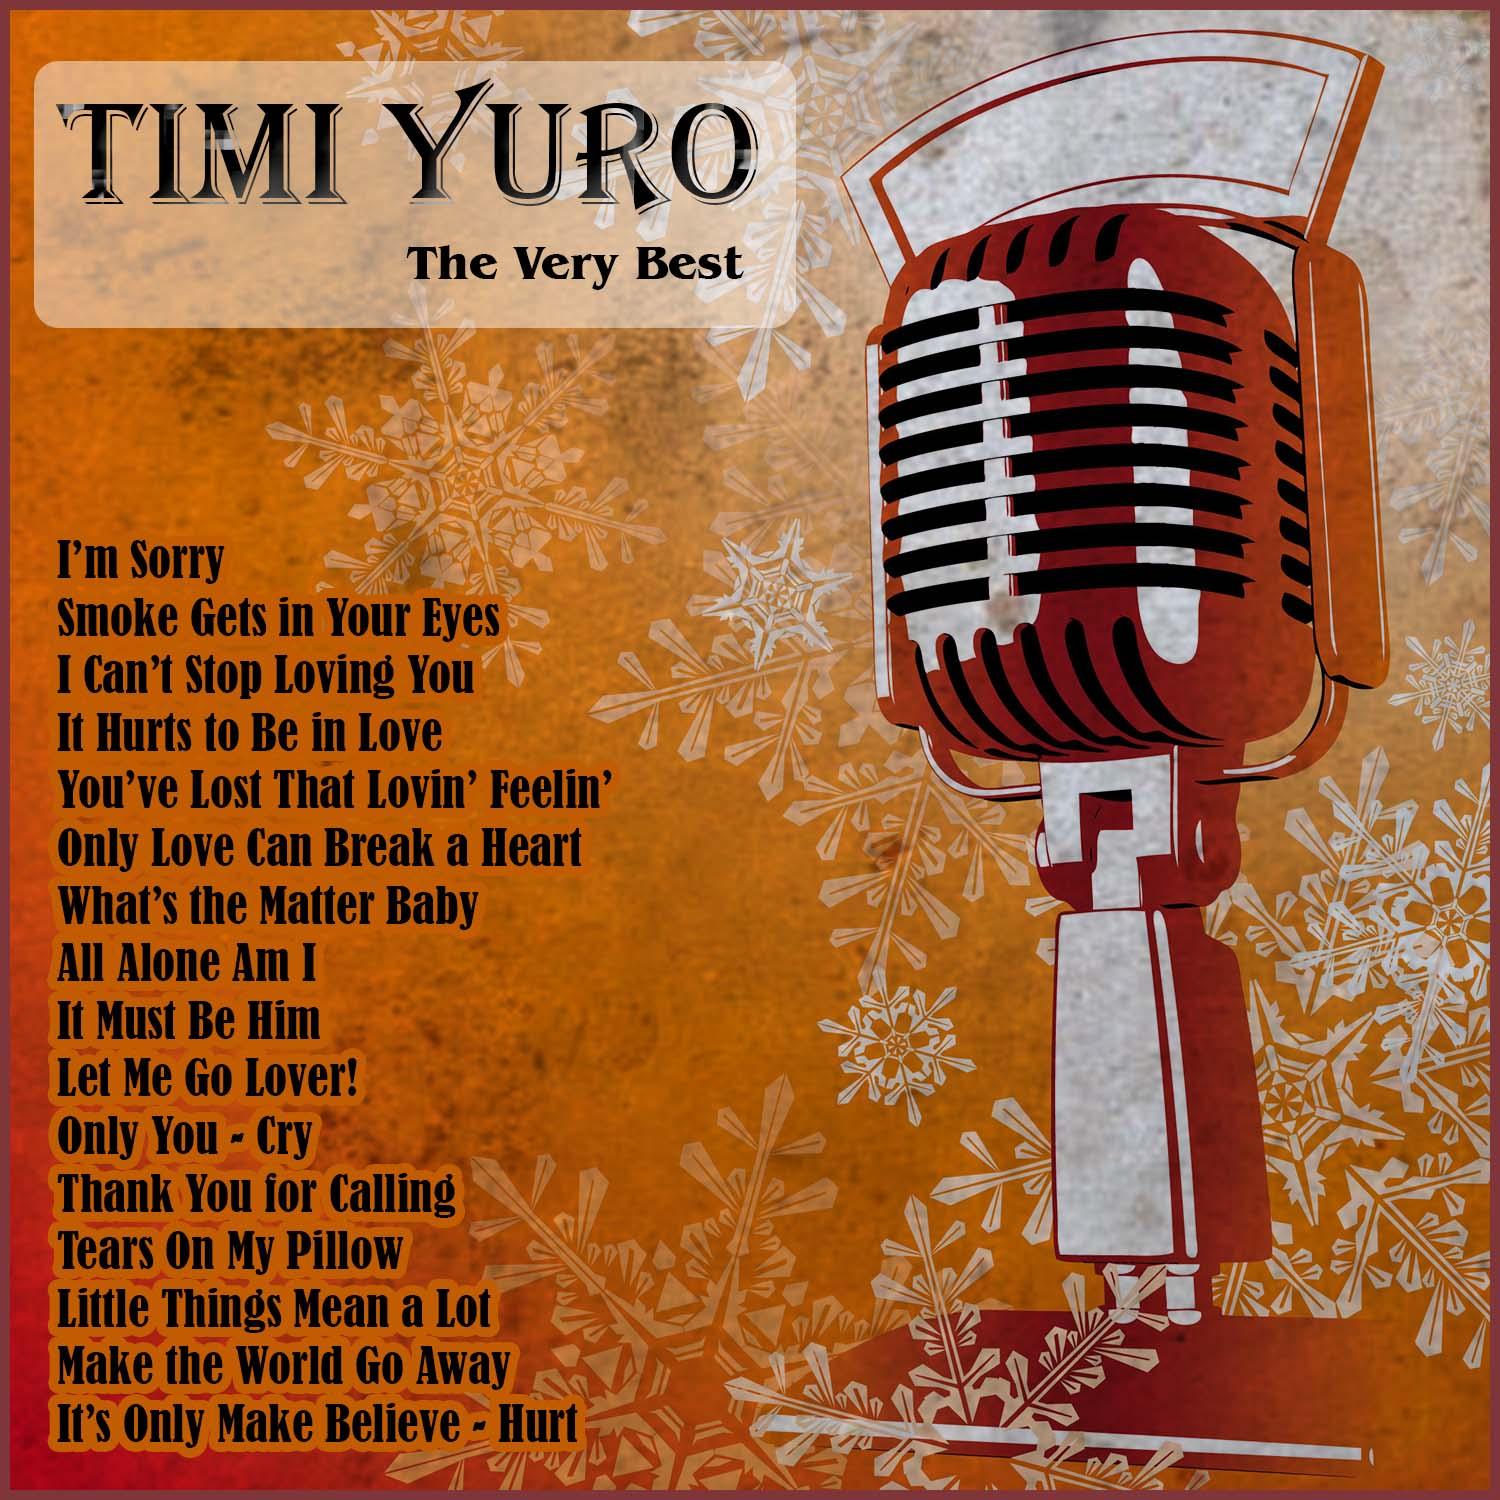 The Very Best: Timi Yuro